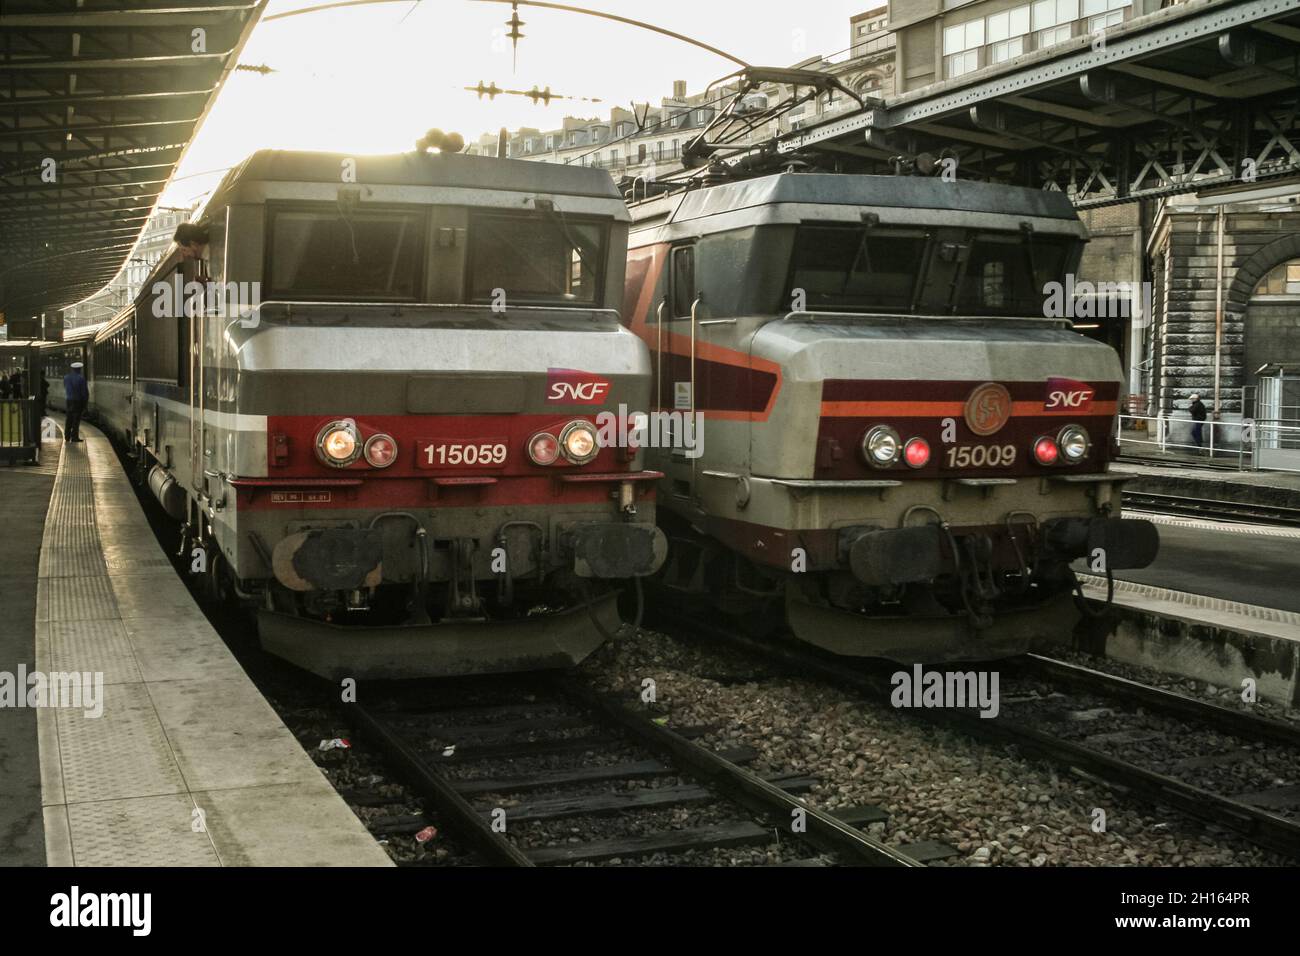 PARIS, FRANCE - JANUARY 2, 2007: Two electric locomotives BB 15000 ready for departure in Paris Gare de l'Est train station at dusk, with the logo of Stock Photo